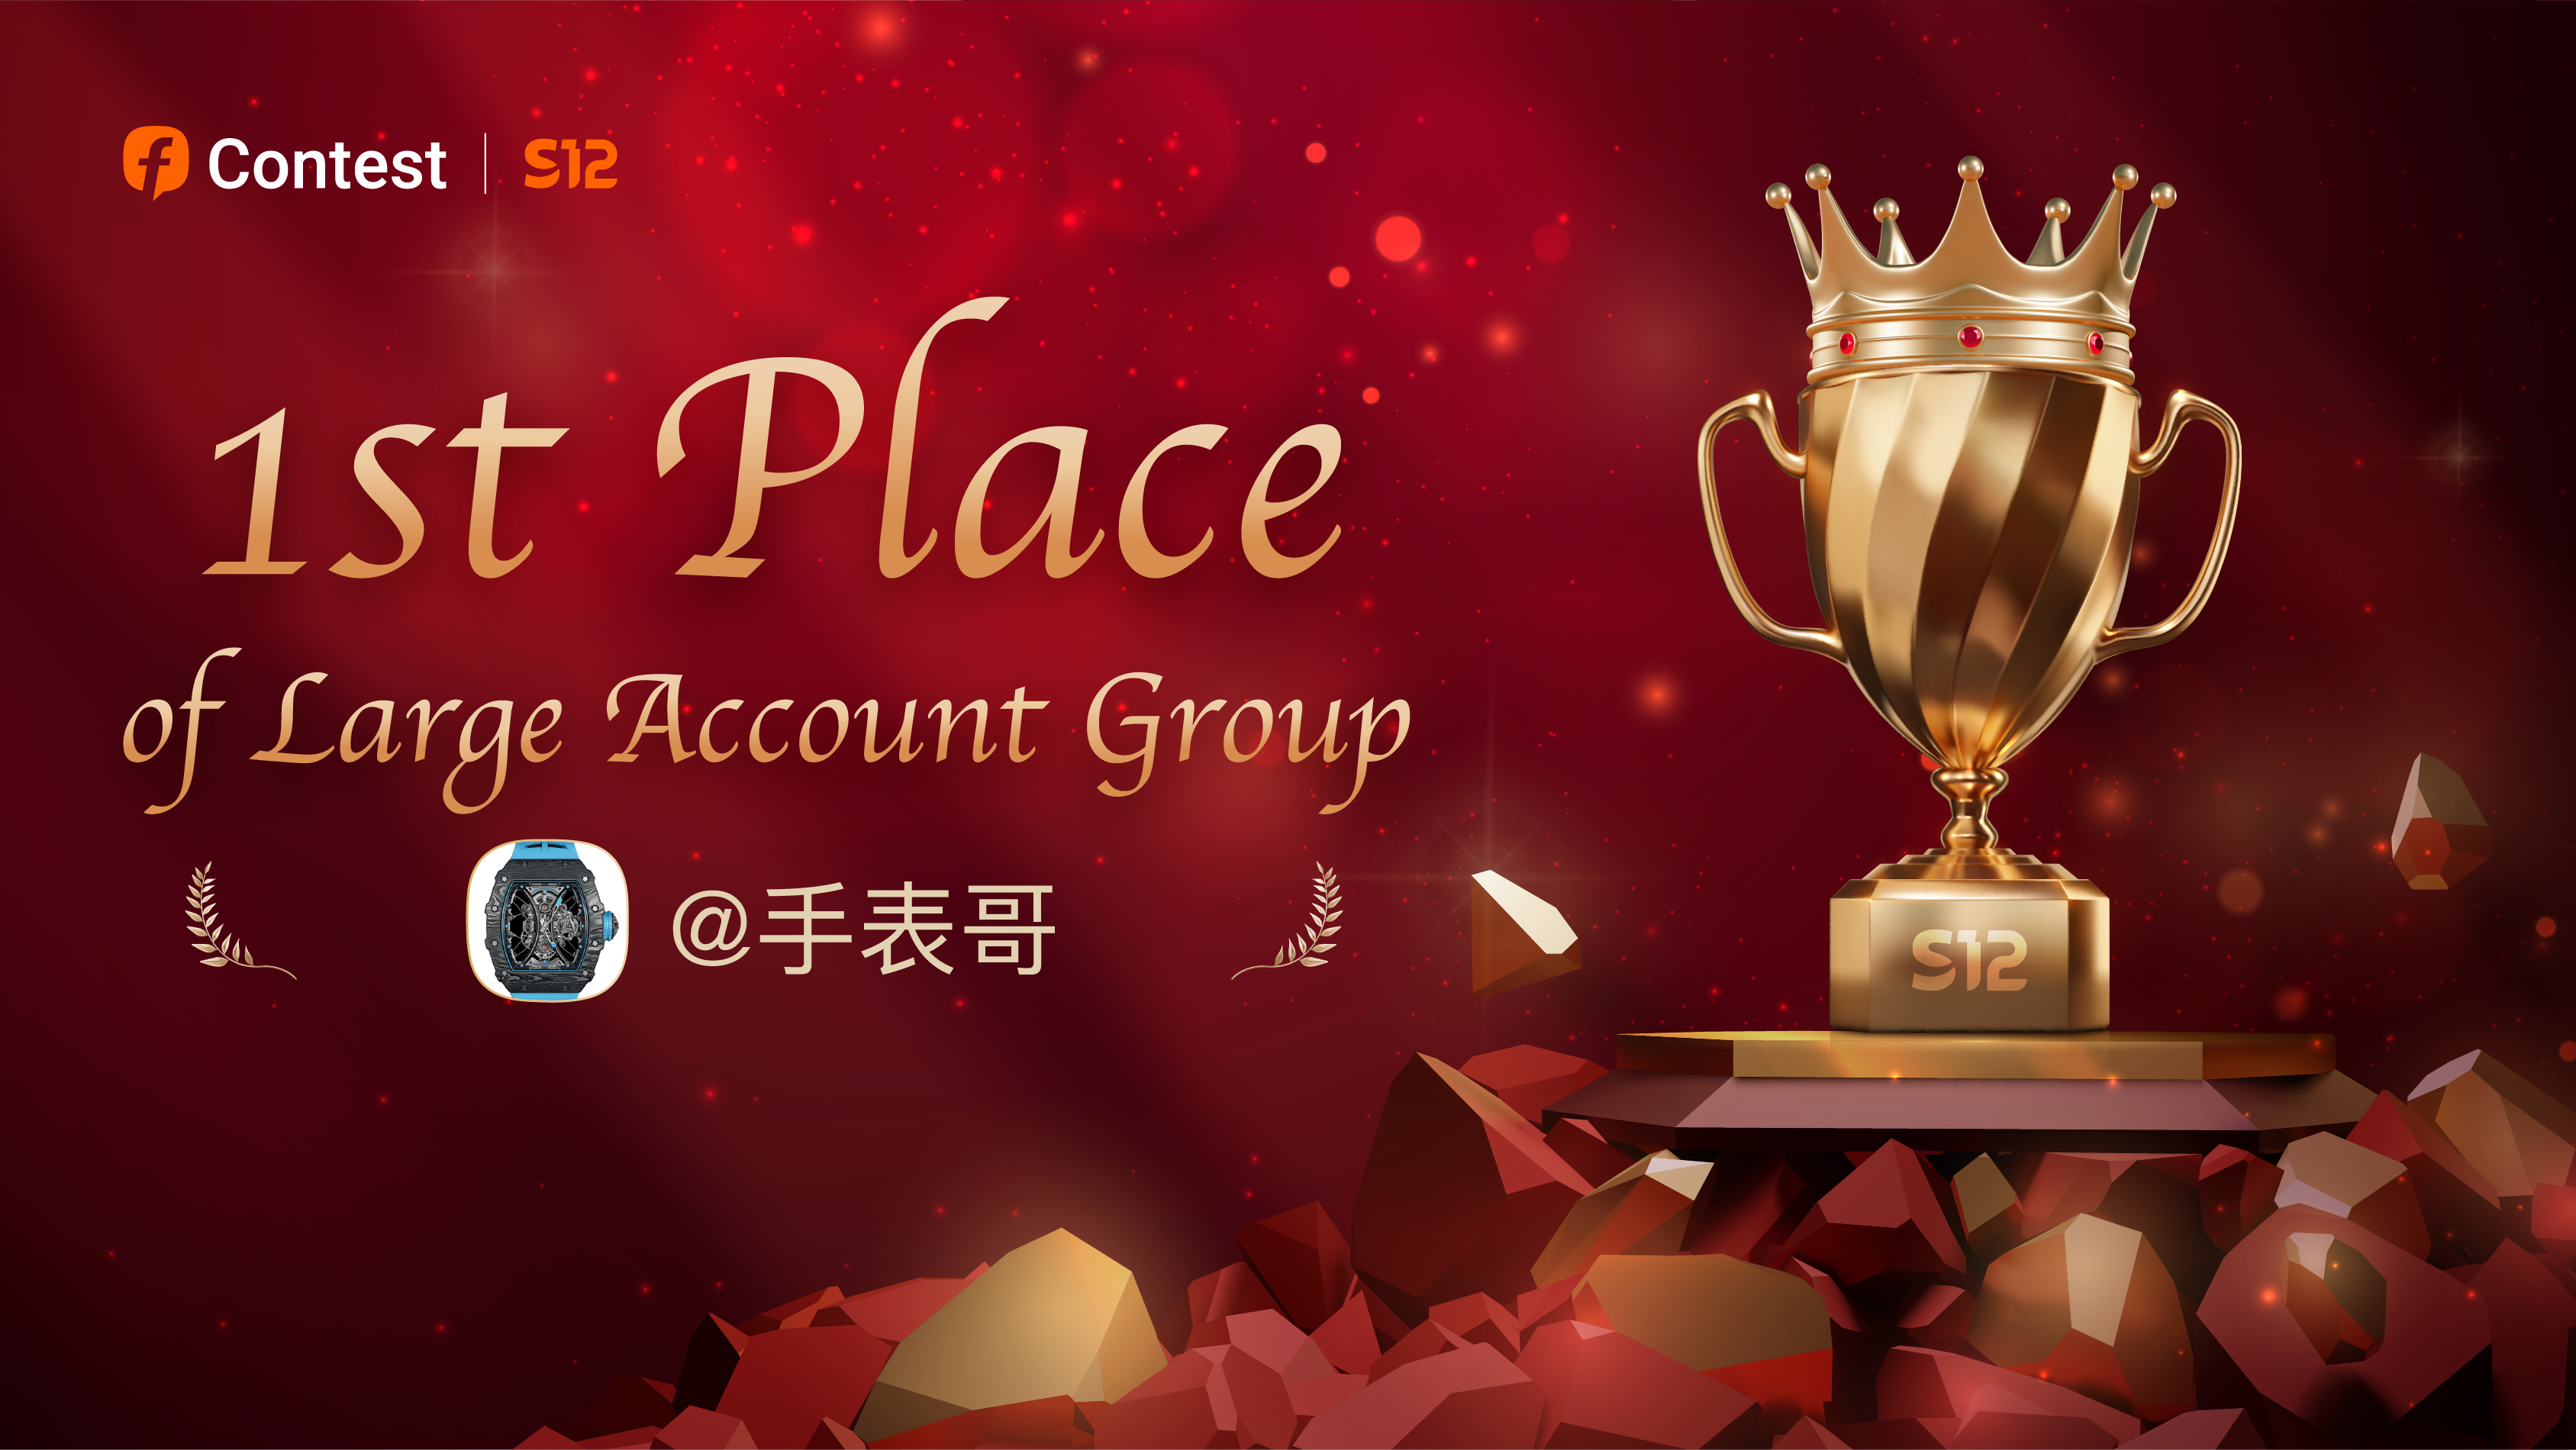 S12 | Share Moment for 1st Place of Large Account Group